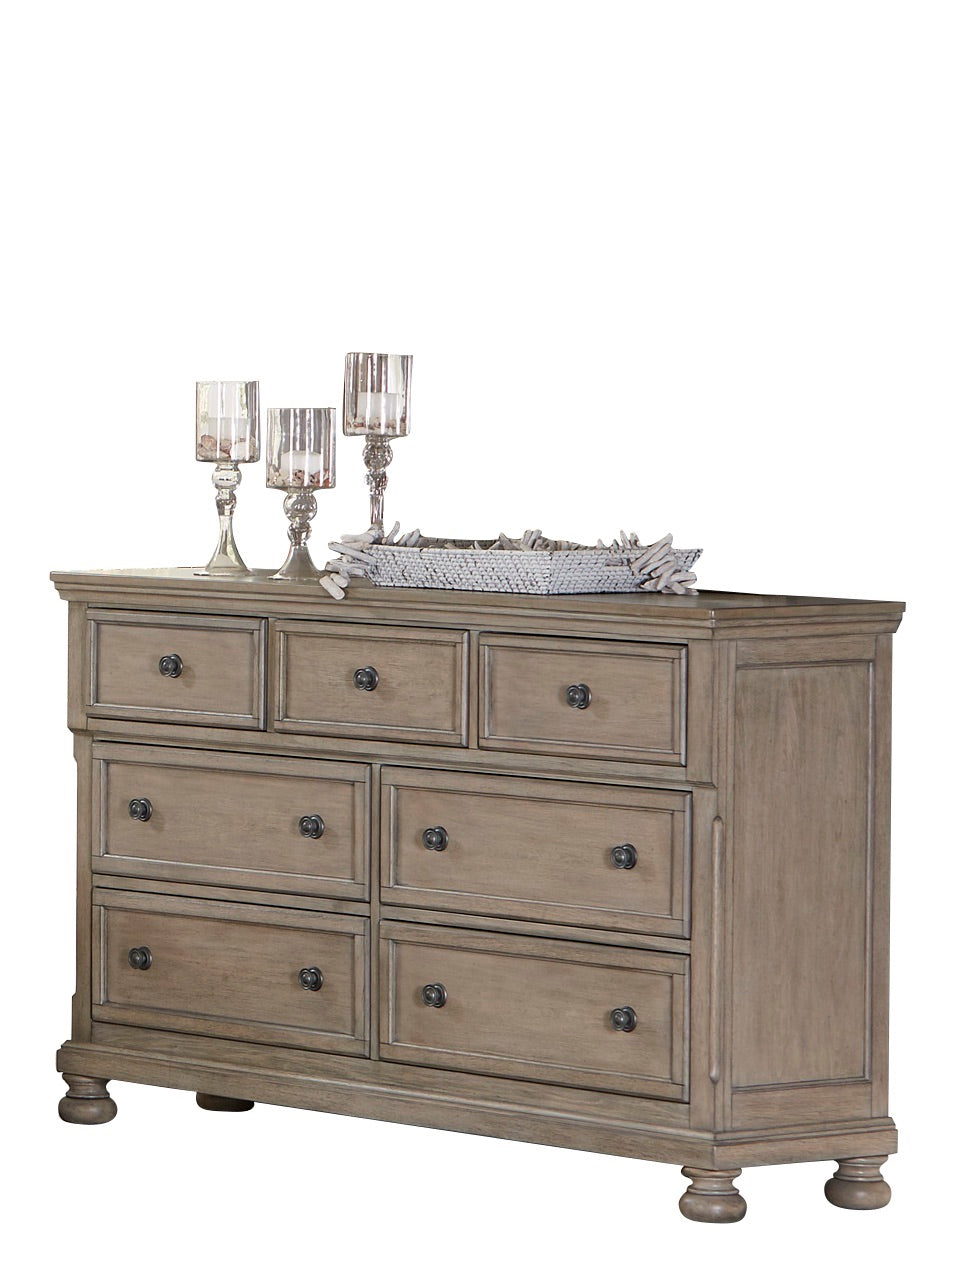 Broville Rustic Dresser with Hidden Drawer in Weathered Wood